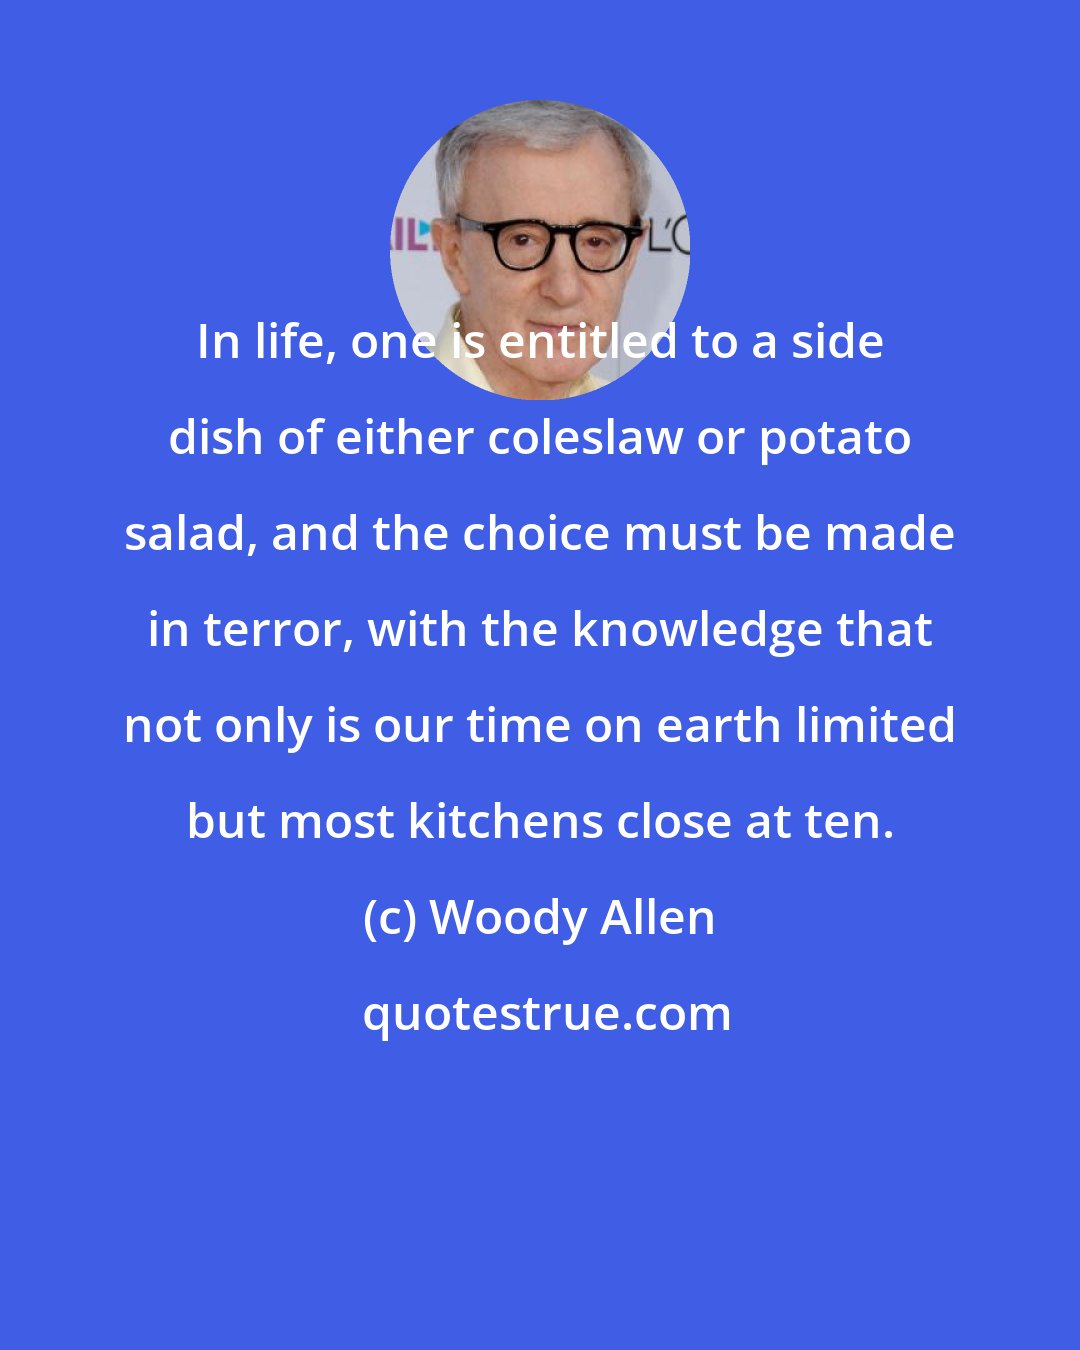 Woody Allen: In life, one is entitled to a side dish of either coleslaw or potato salad, and the choice must be made in terror, with the knowledge that not only is our time on earth limited but most kitchens close at ten.